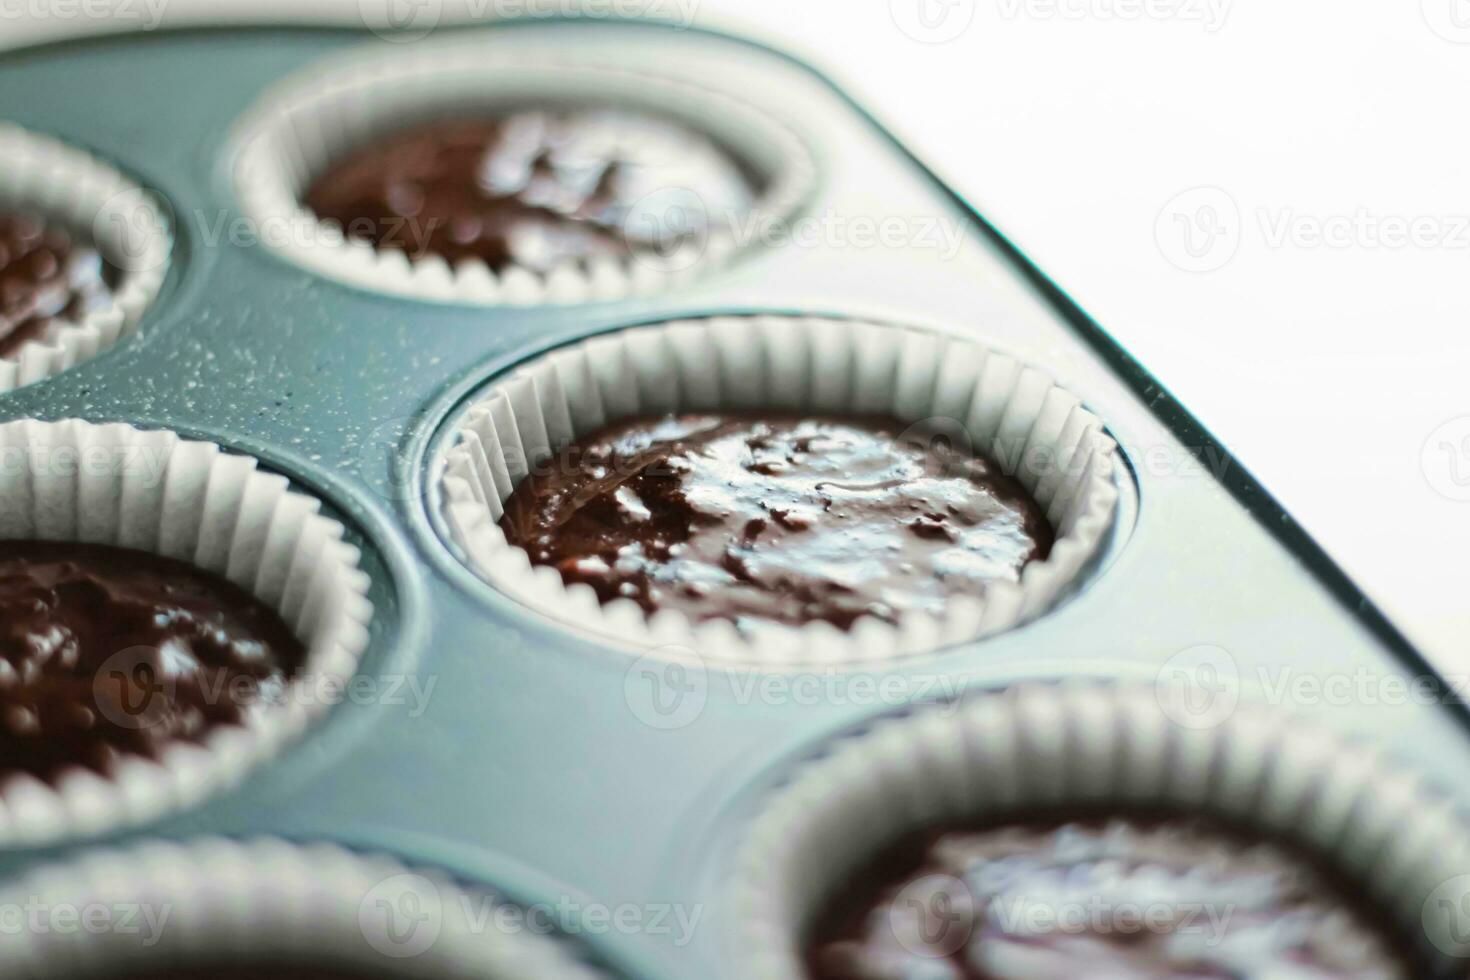 Chocolate muffin or cupcake batter in a pan ready to bake, homemade comfort food recipe photo